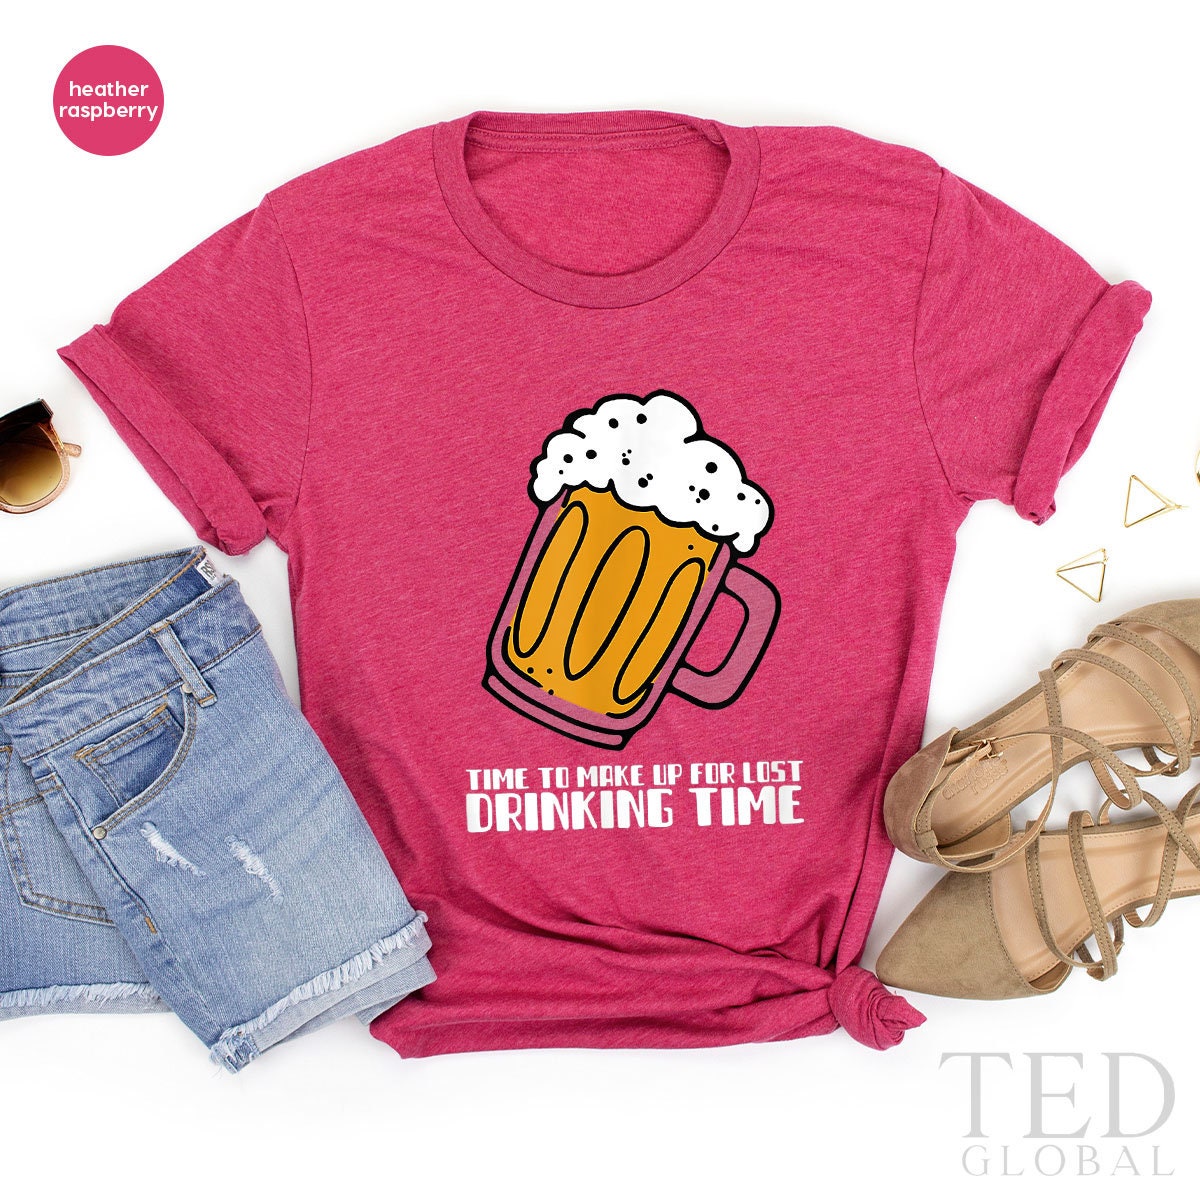 Drinking Time T-Shirt, Beer Lover T Shirt, A Cold Beer Tee, Alcohol Shirts, Drinking Day Shirt, Funny Drinker TShirt, Gift For Bartender - Fastdeliverytees.com